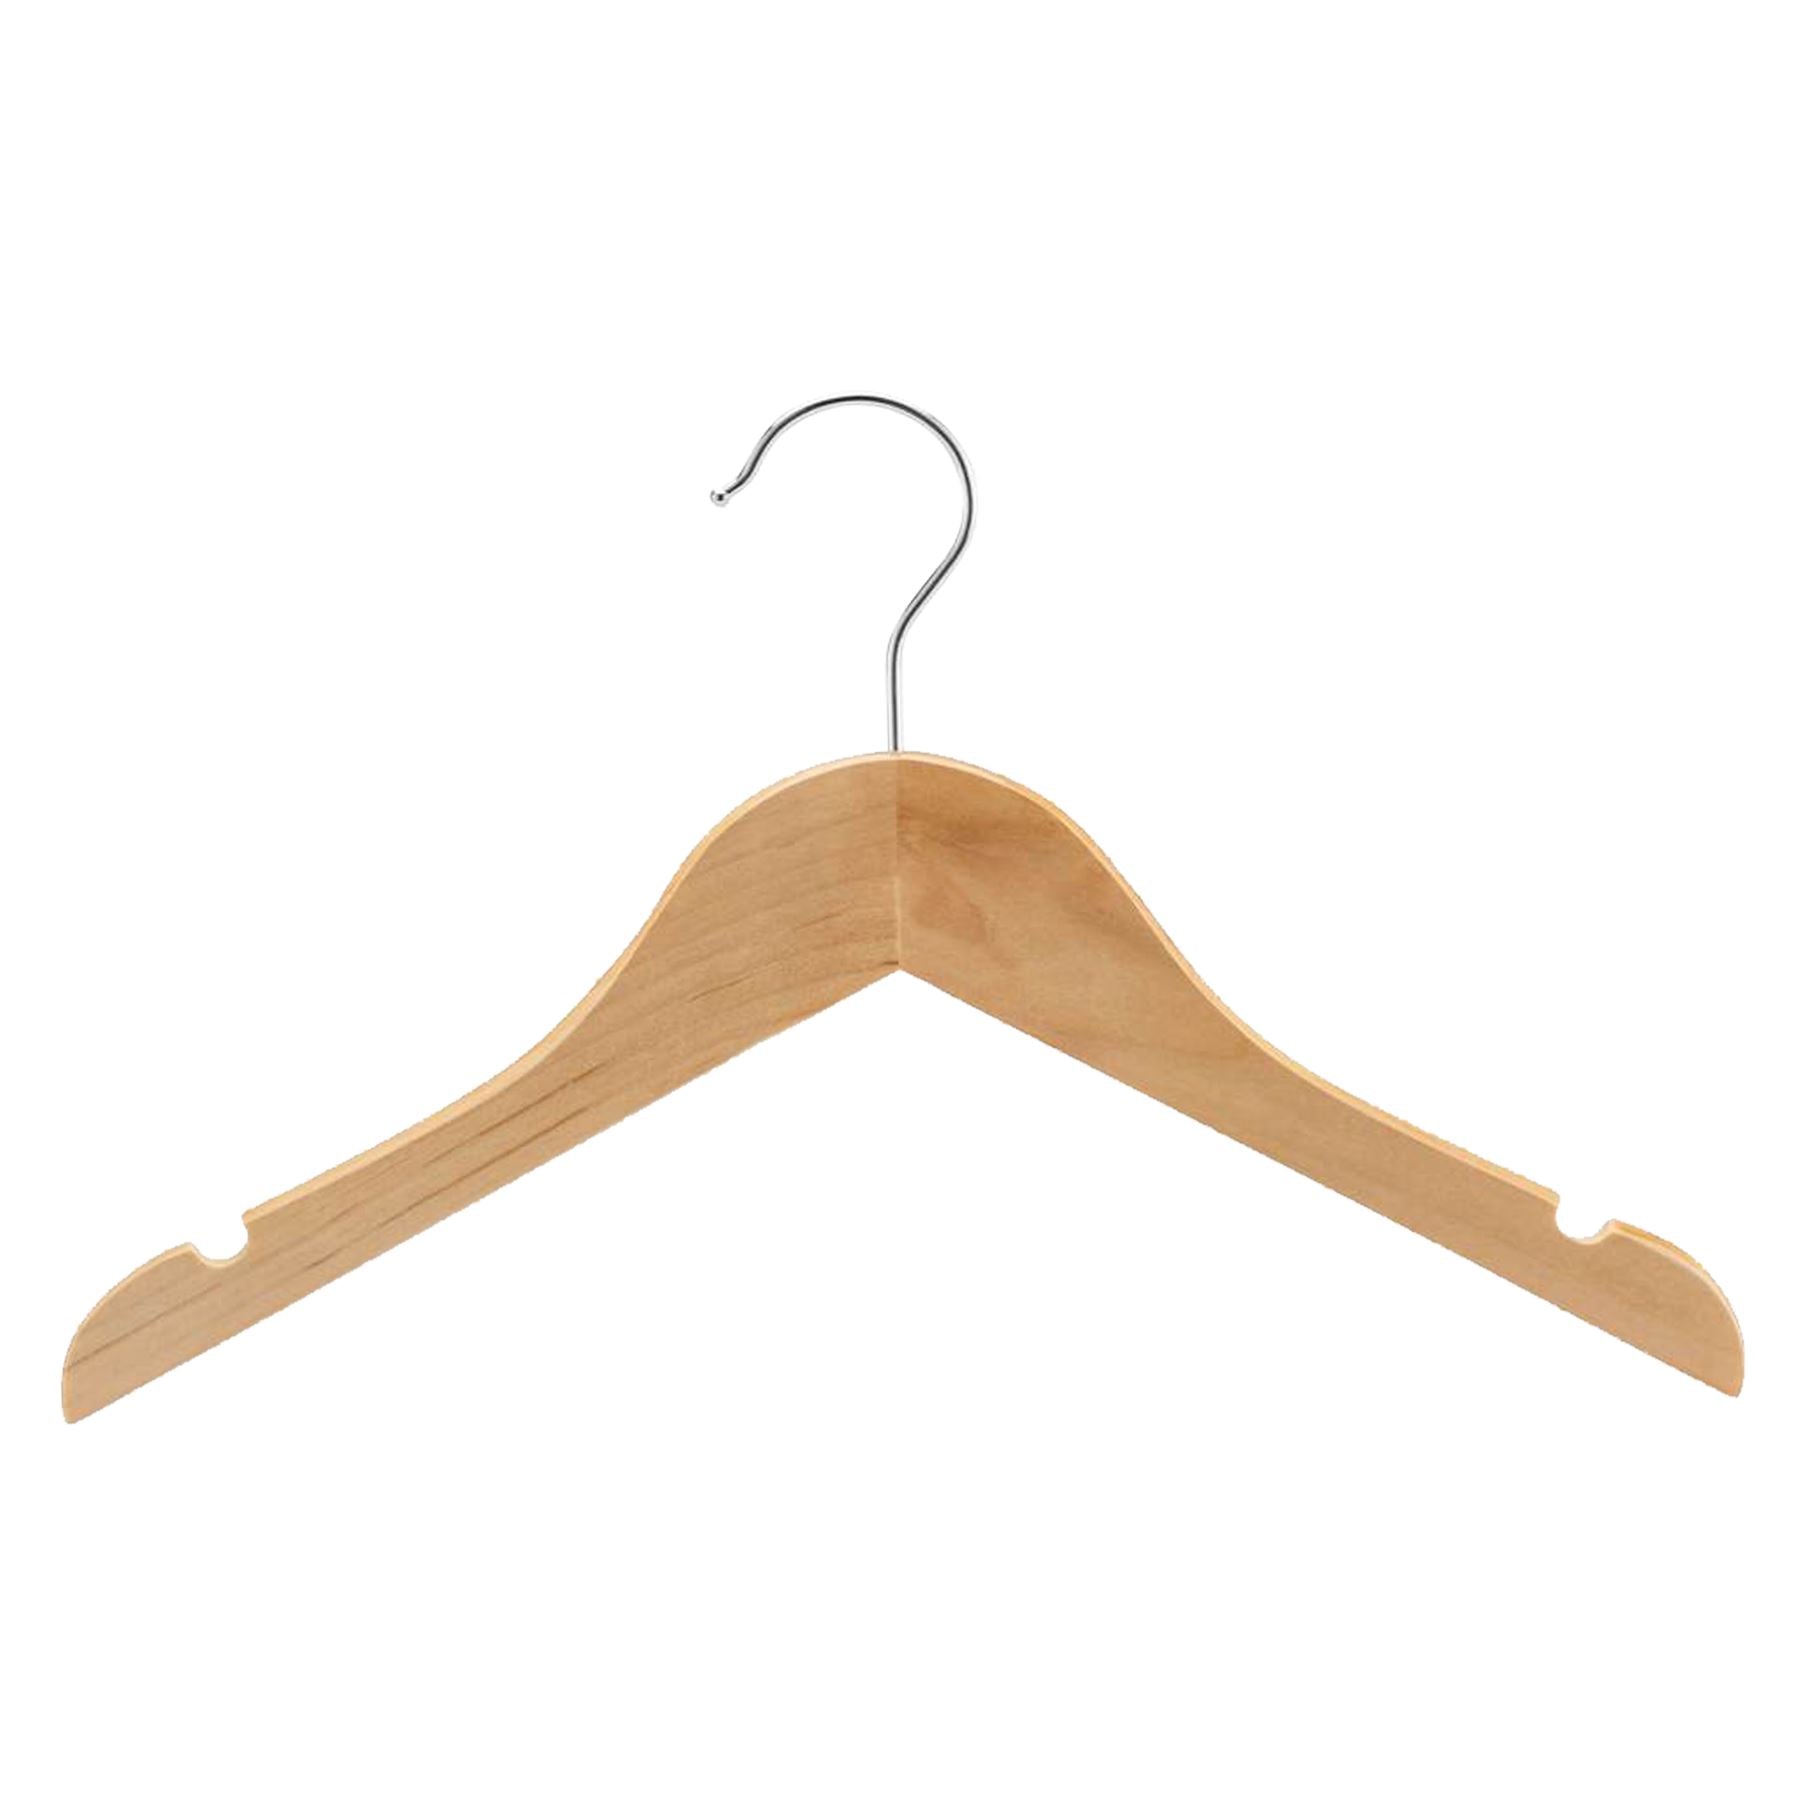 Children's Wooden Clothes Hangers Hangers Craftworks NW Natural 1-Side None